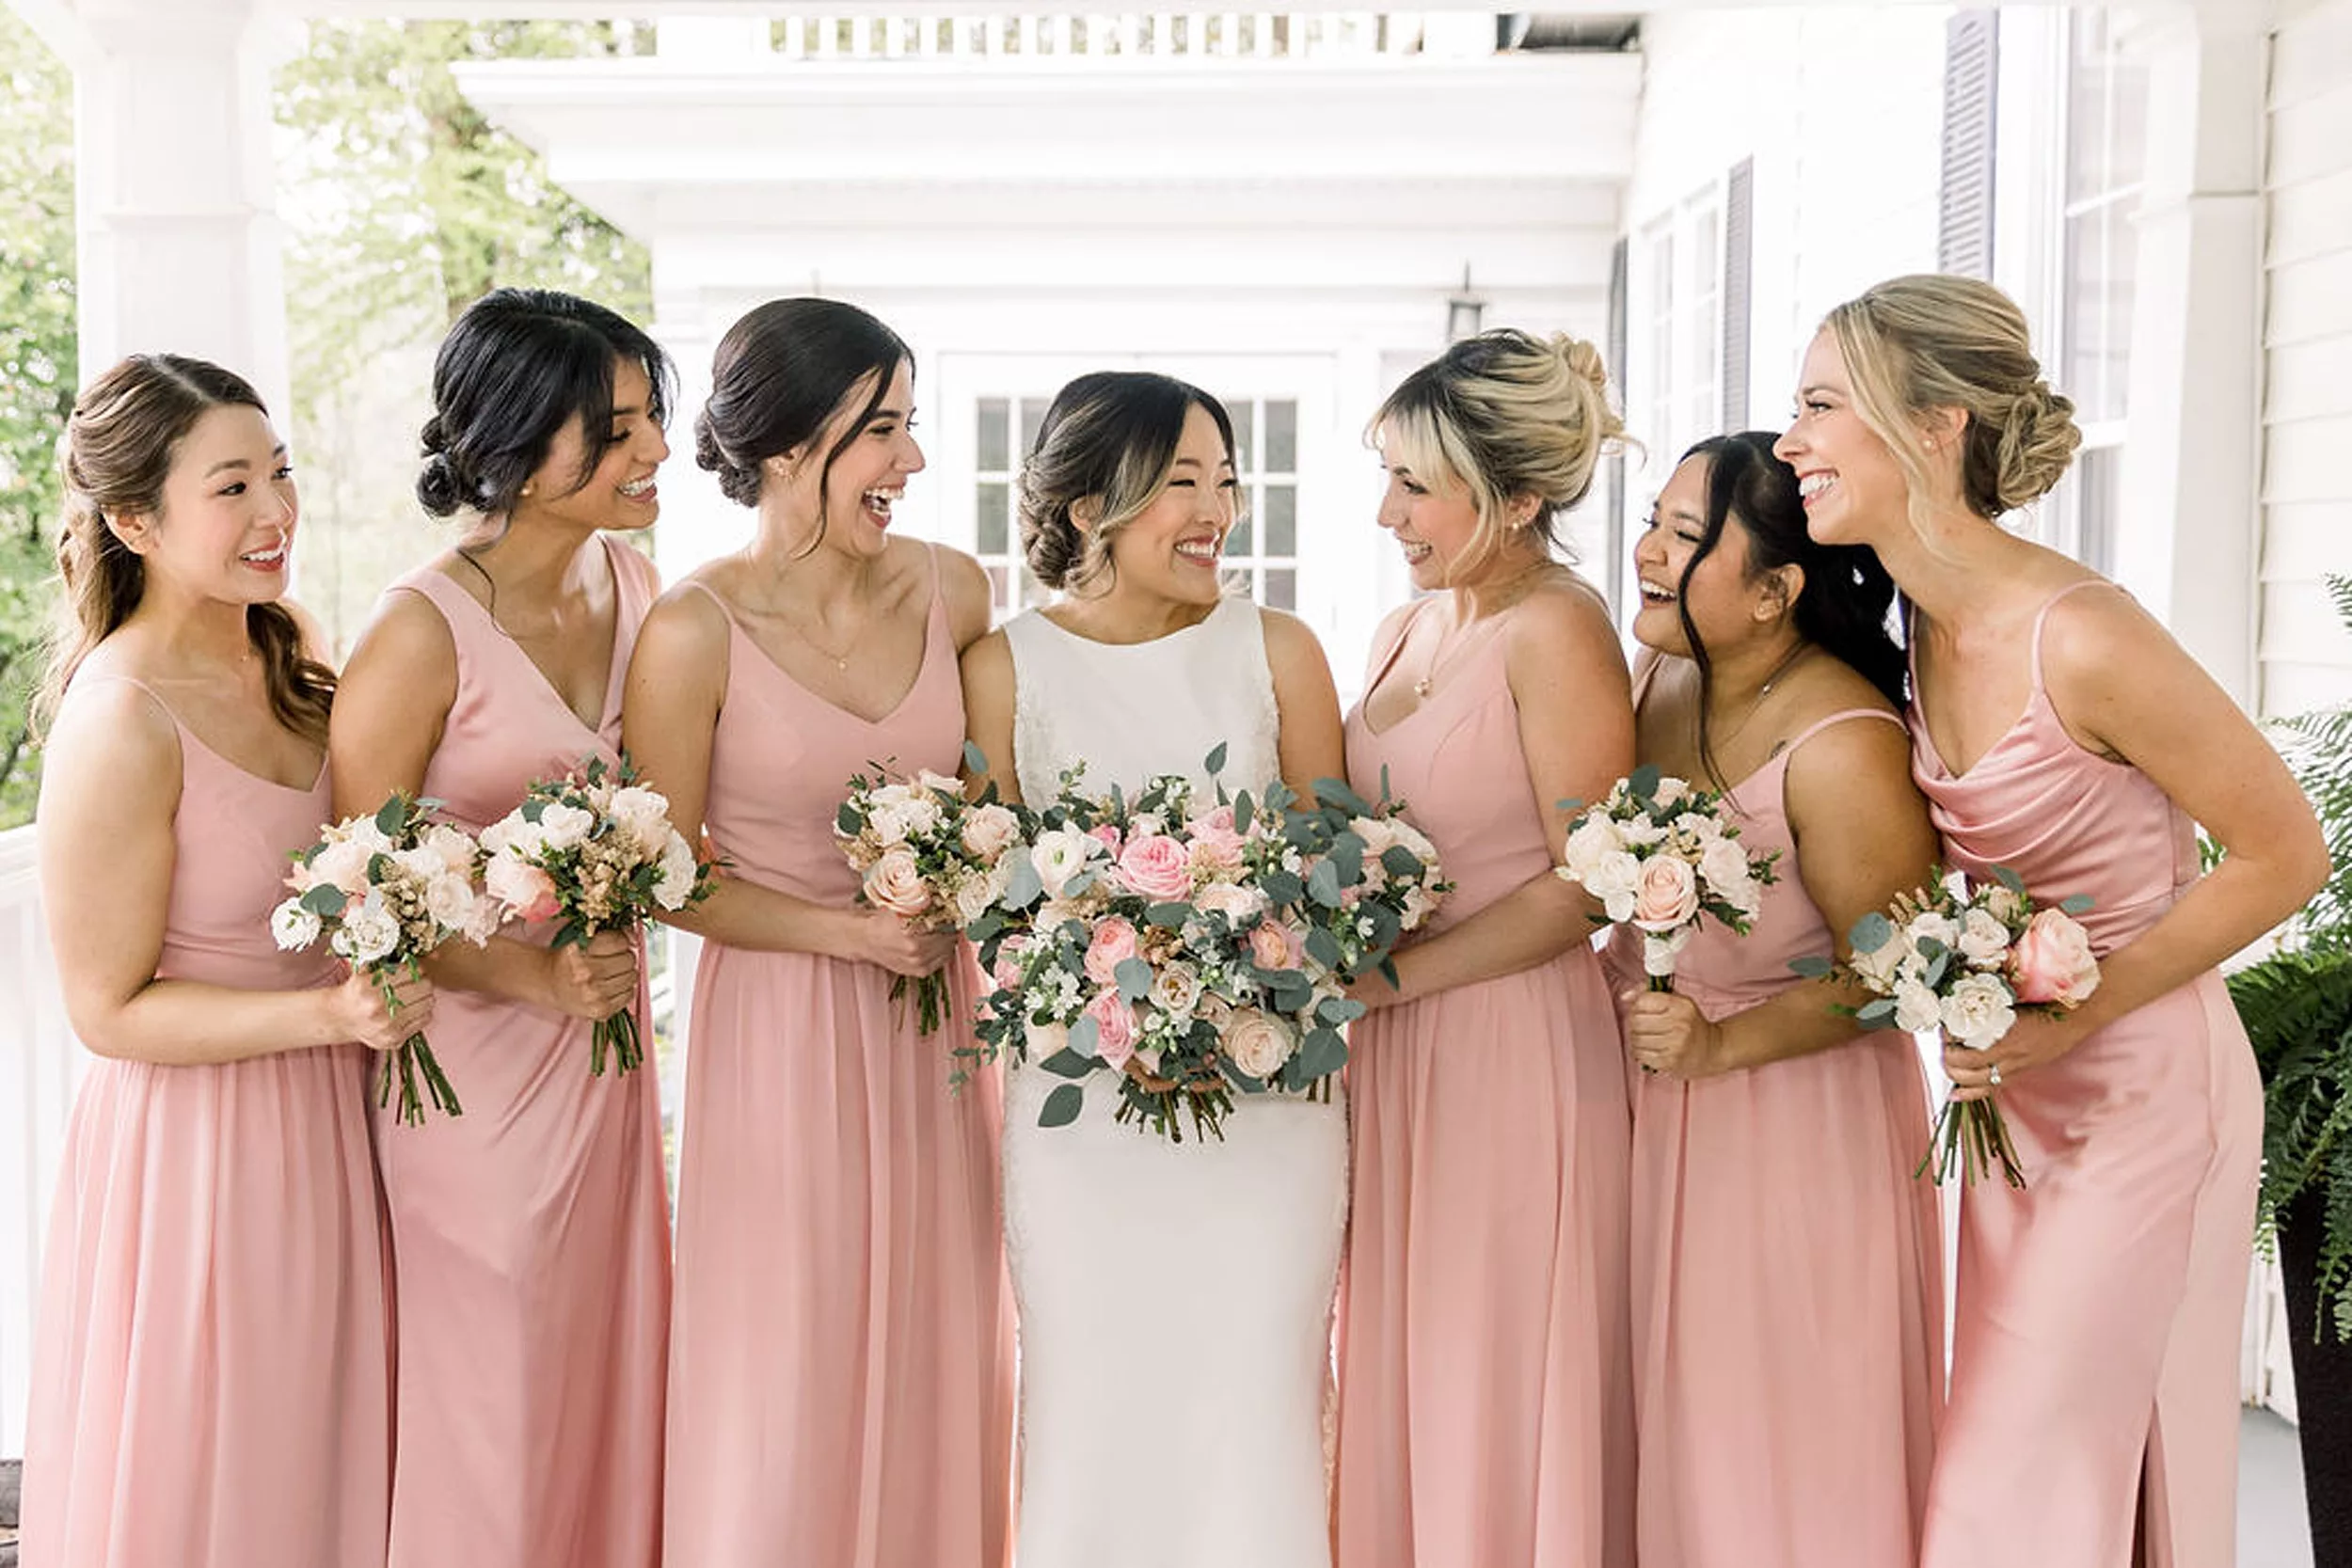 A bride smiles and laughs with her bridesmaids in pink dresses on a porch